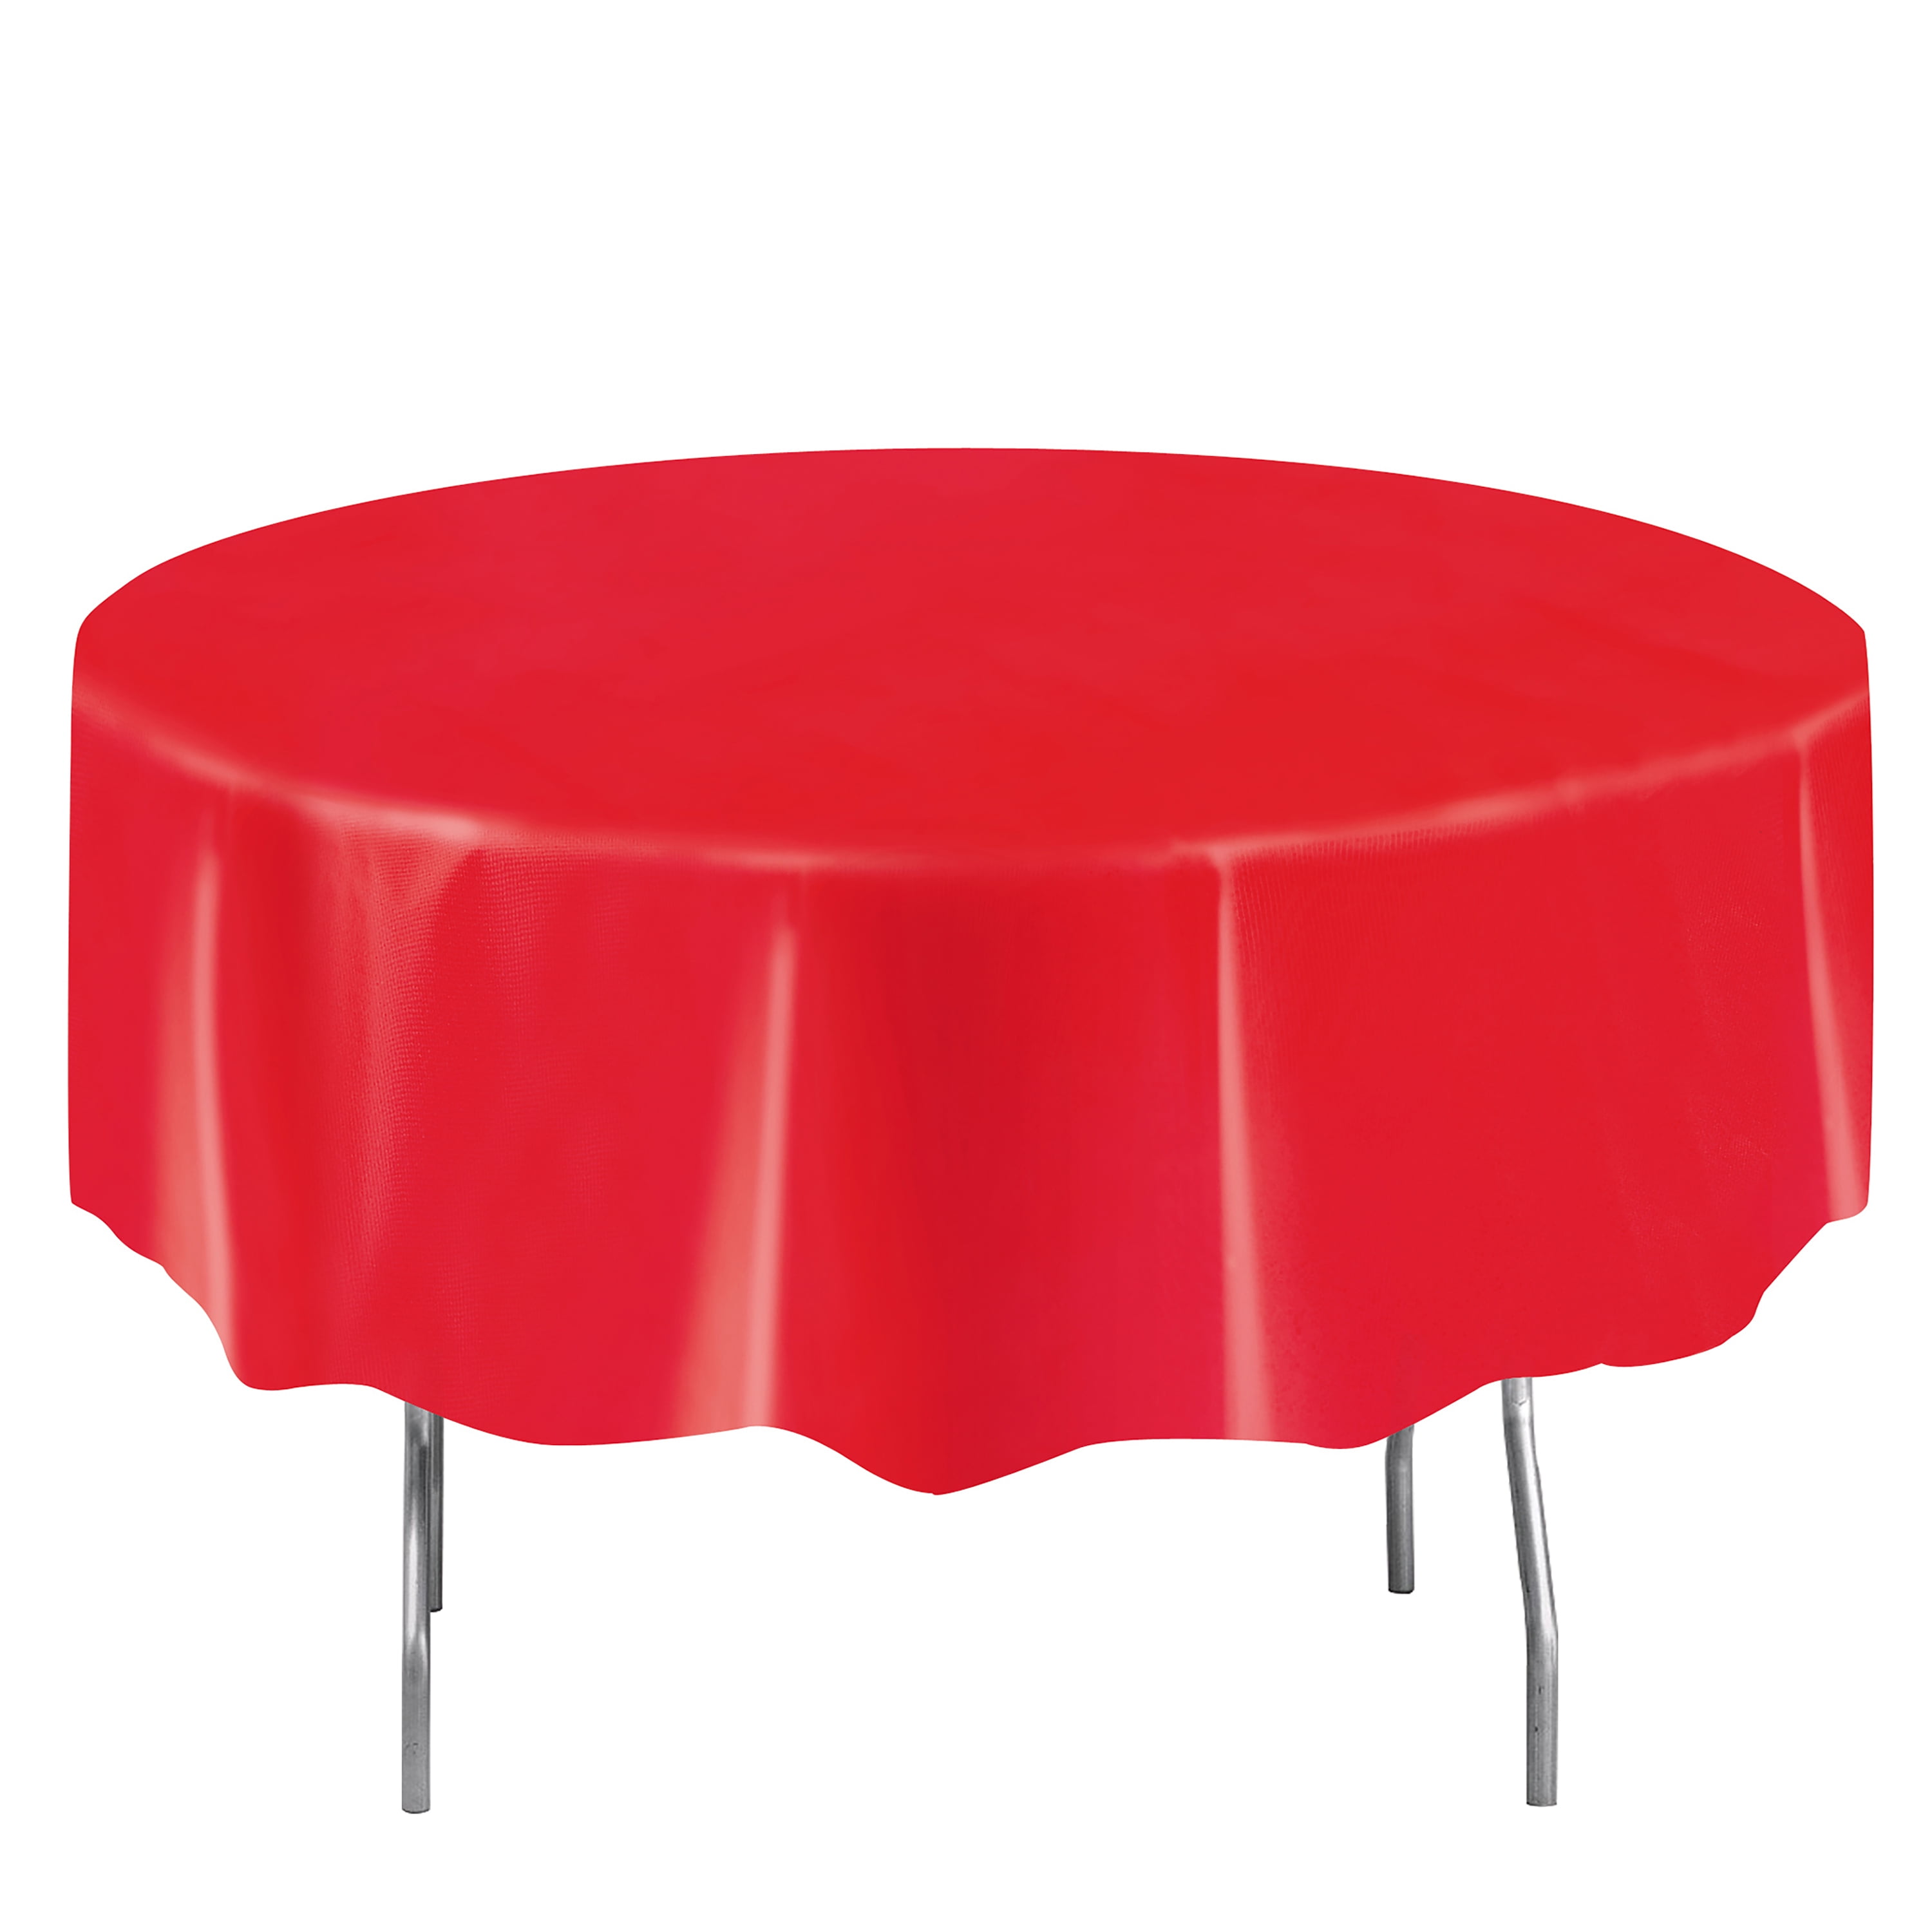 Way to Celebrate! Red Plastic Round Tablecloths, Round, 84in, 2ct